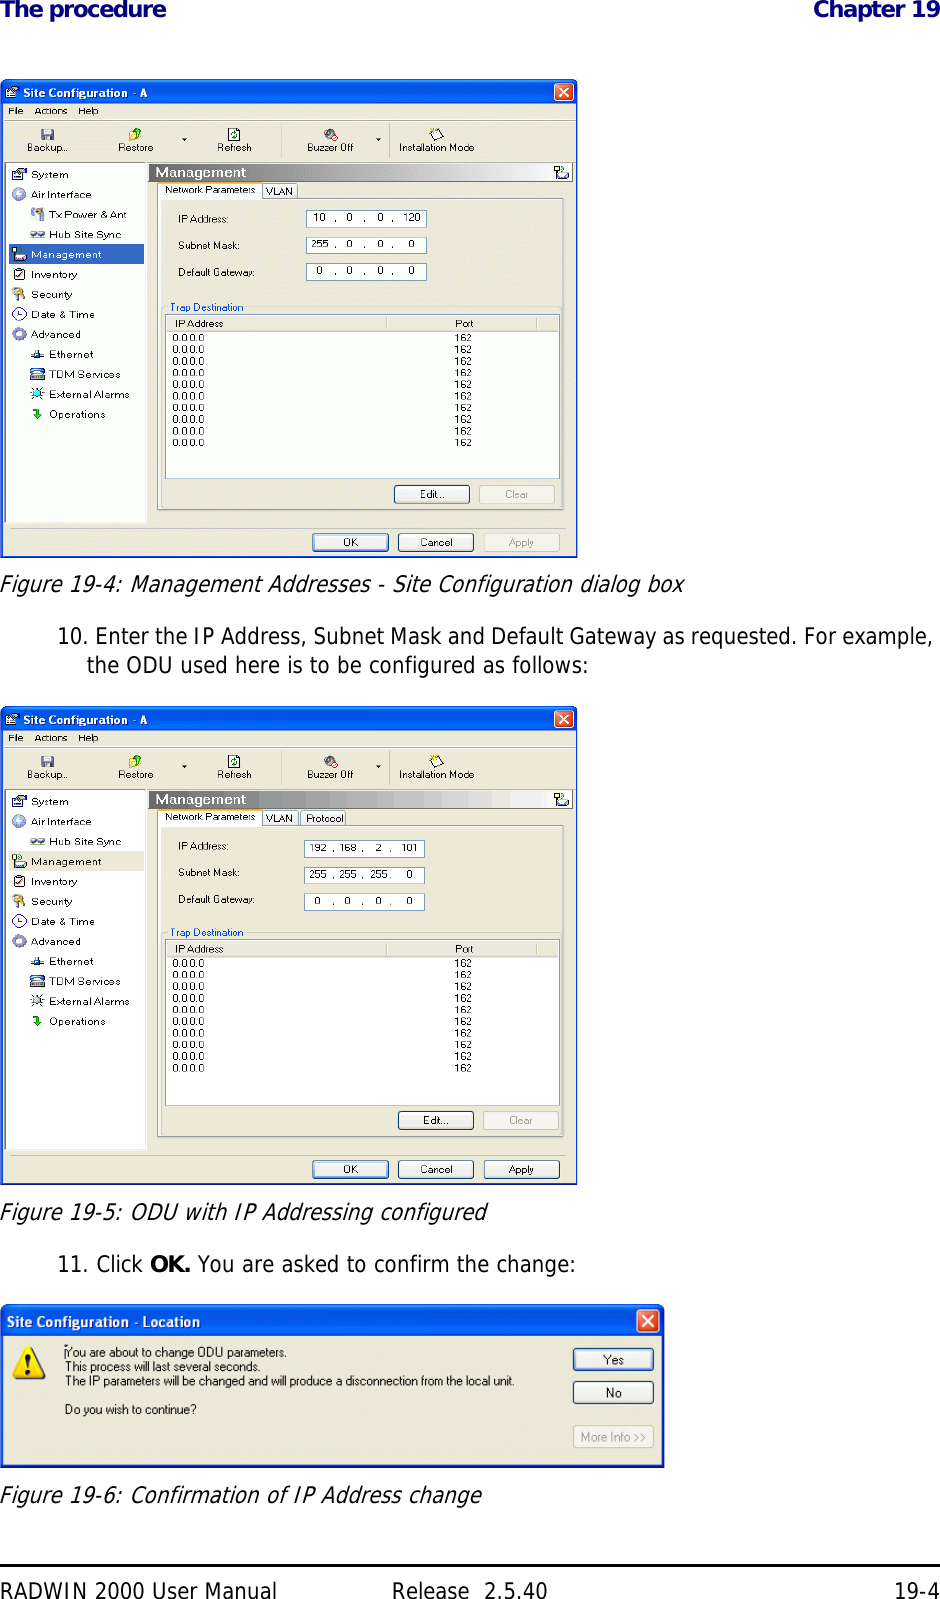 The procedure Chapter 19RADWIN 2000 User Manual Release  2.5.40 19-4Figure 19-4: Management Addresses - Site Configuration dialog box10. Enter the IP Address, Subnet Mask and Default Gateway as requested. For example, the ODU used here is to be configured as follows:Figure 19-5: ODU with IP Addressing configured11. Click OK. You are asked to confirm the change:Figure 19-6: Confirmation of IP Address change